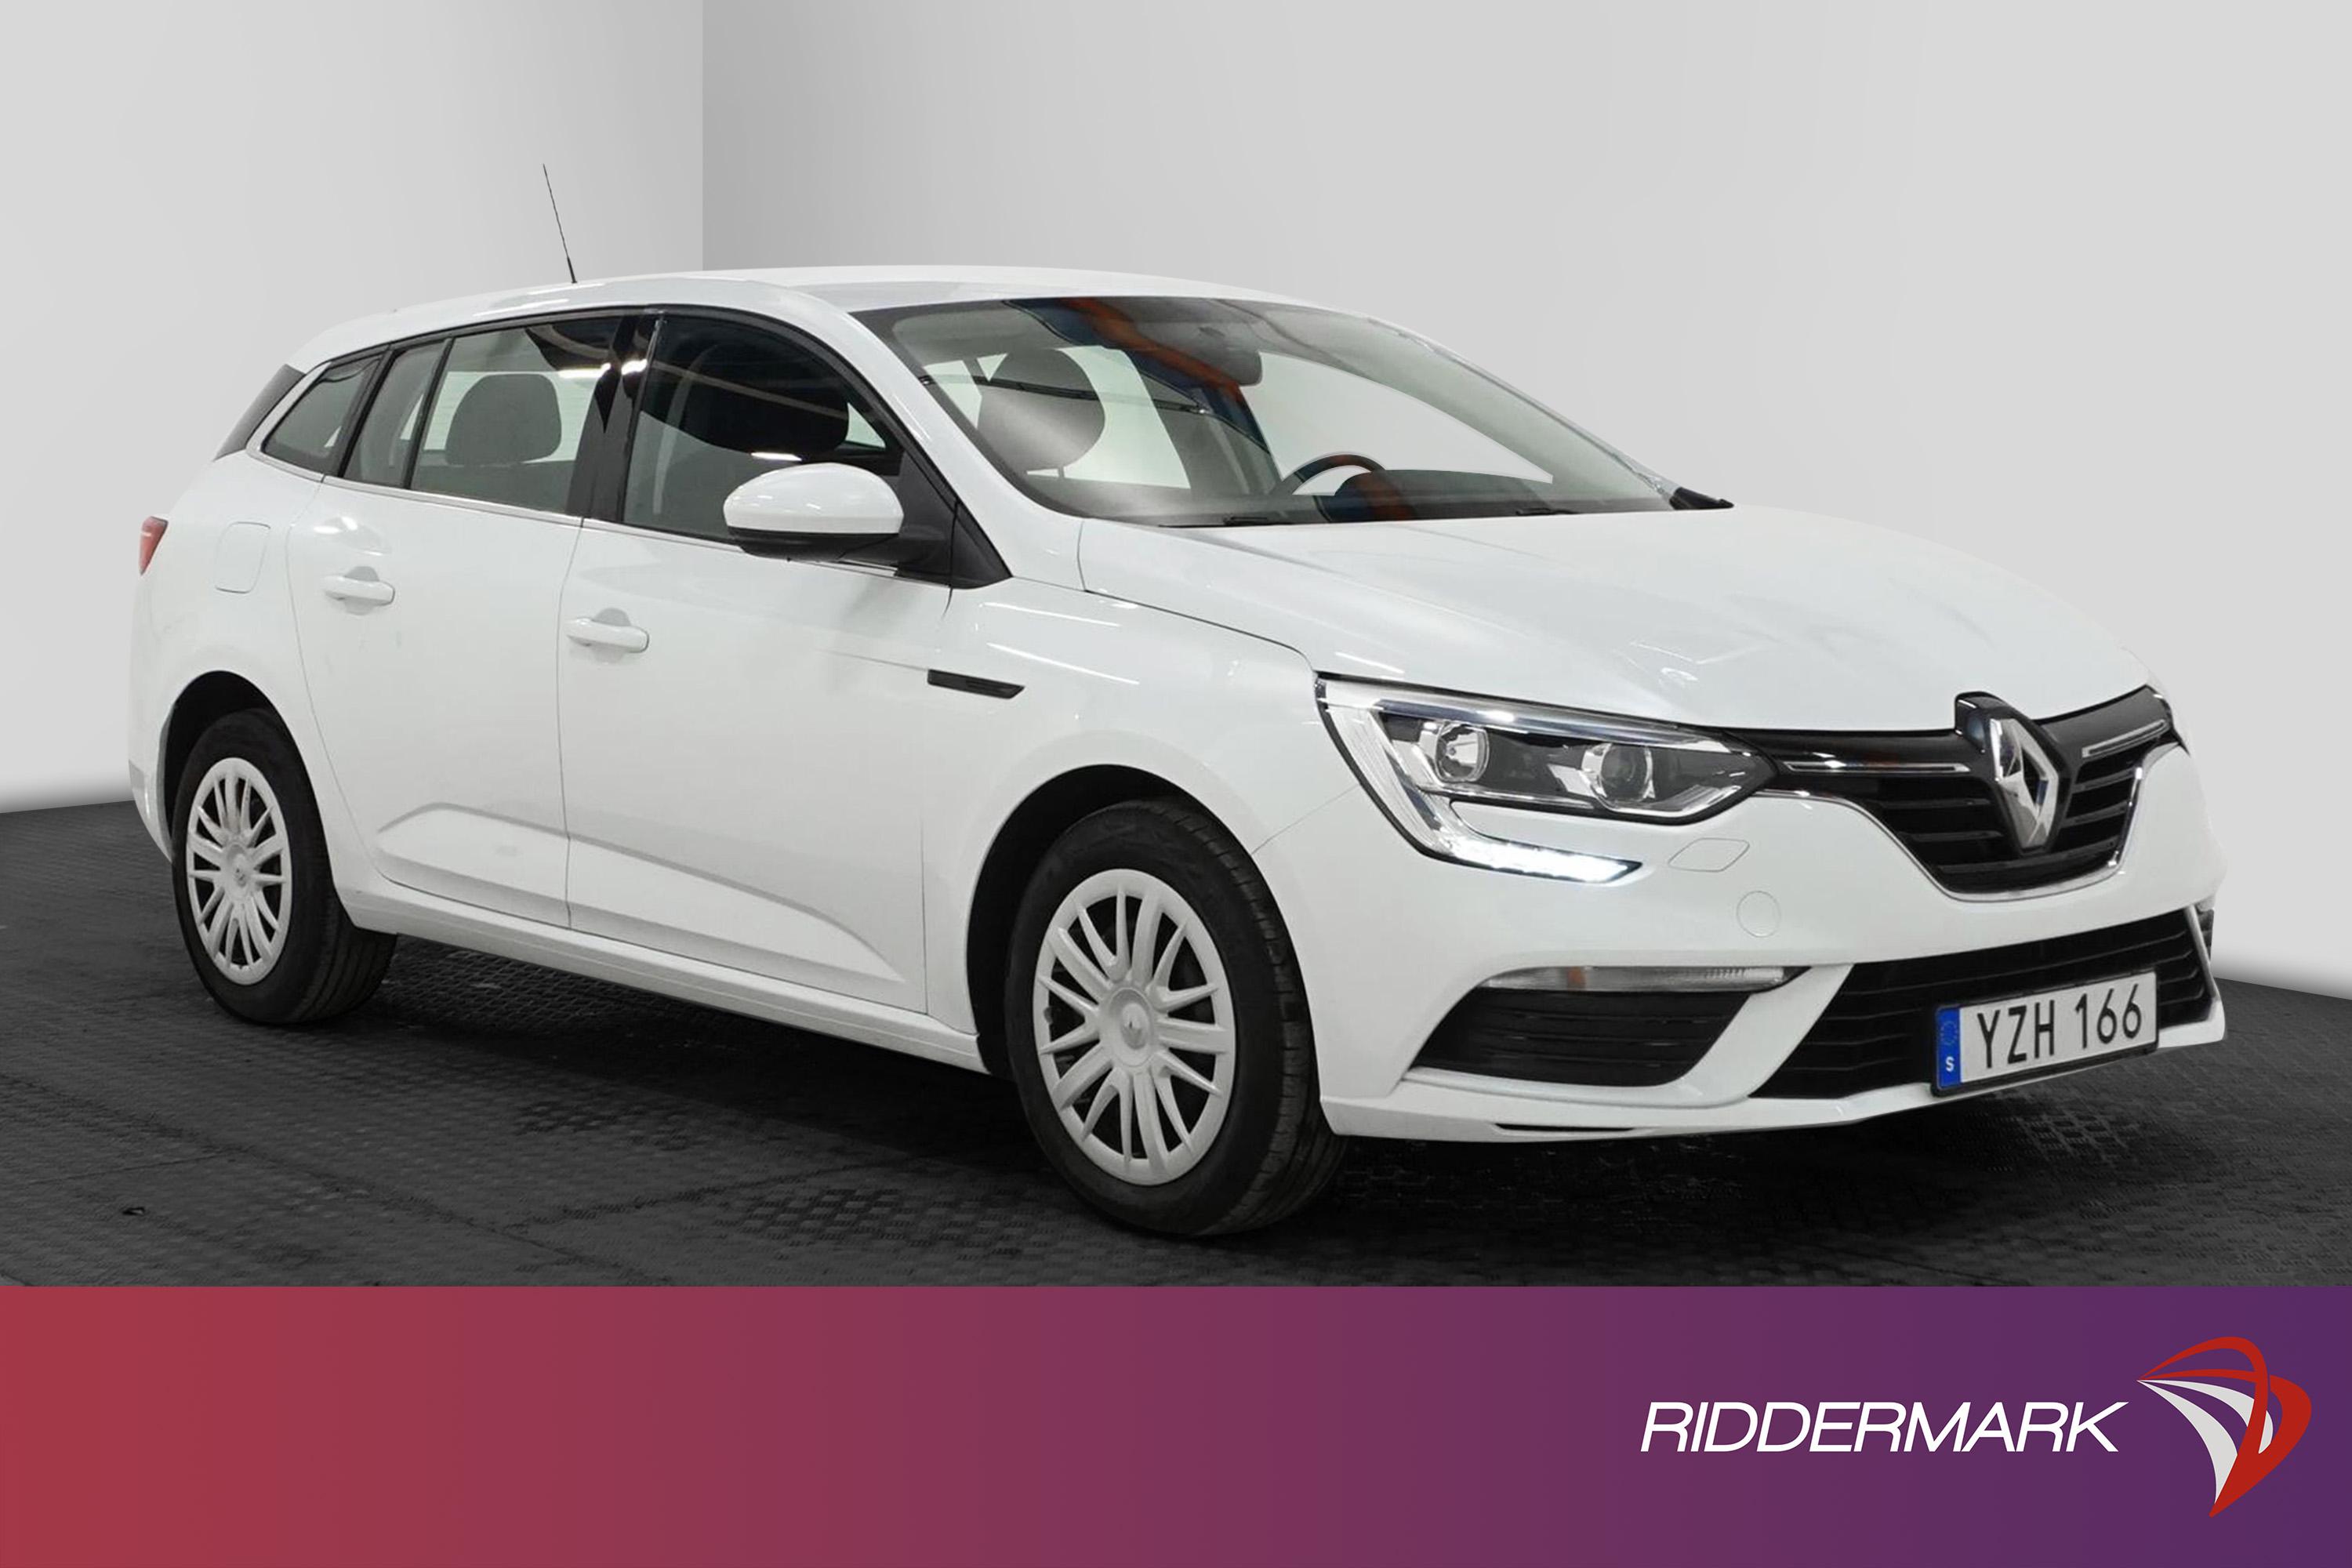 Renault Mégane Sport Tourer 1.2 TCe 101hk Nybes Nyservad